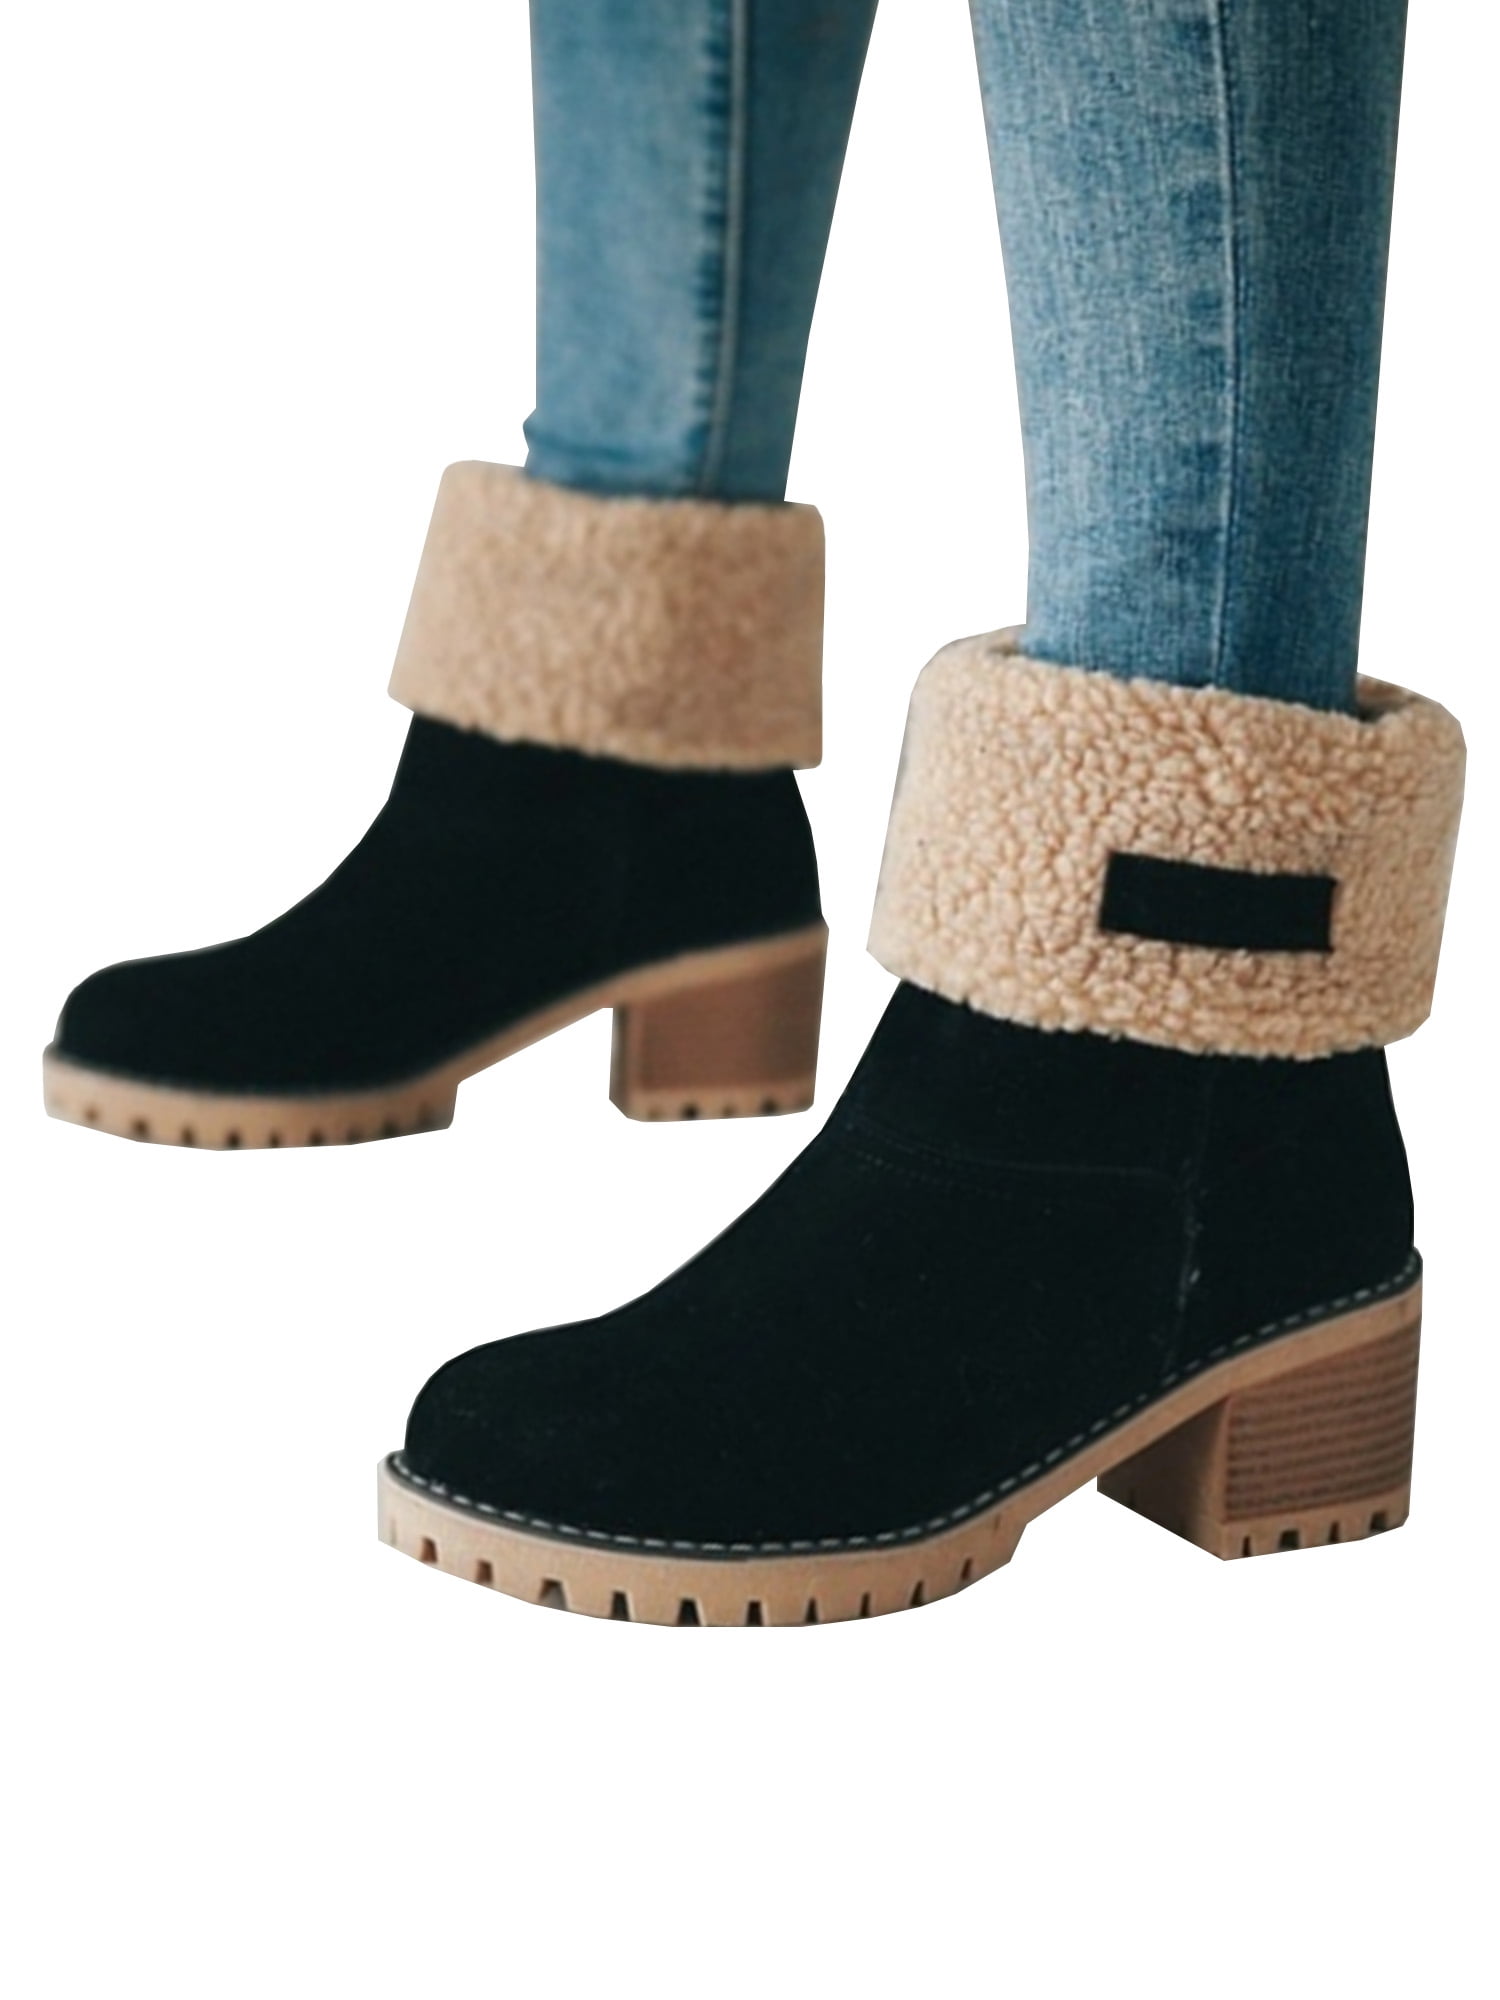 2018 New Winter Women Girl Fluffy Fur Snow Boot Ankle Round Toe Suede Boots Size 